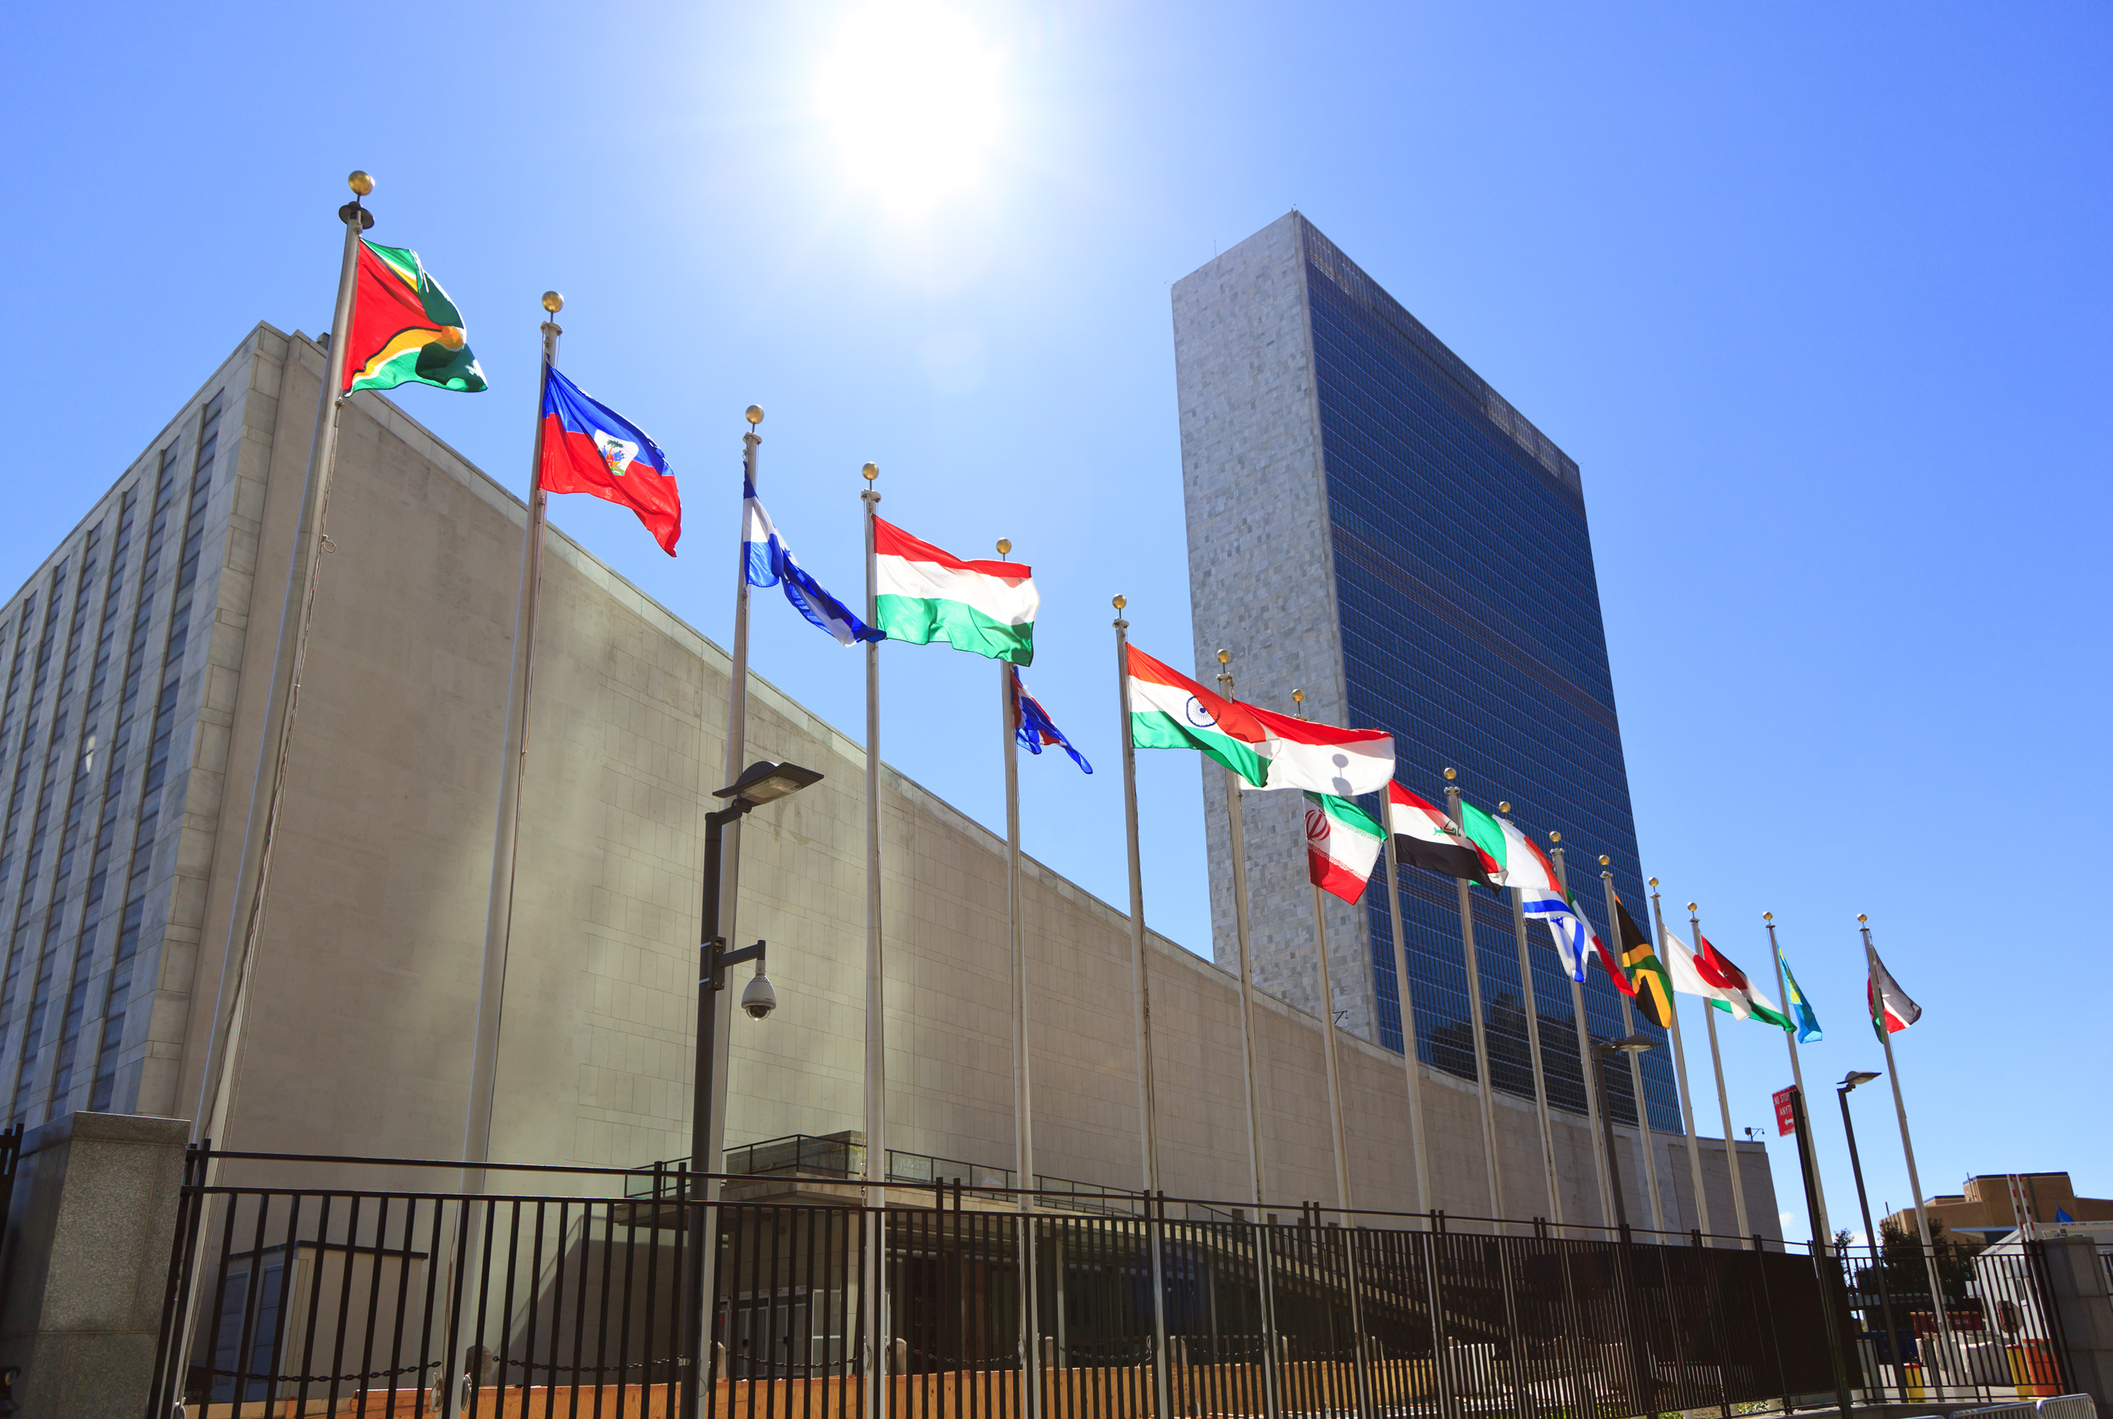 The United Nations headquarters in New York